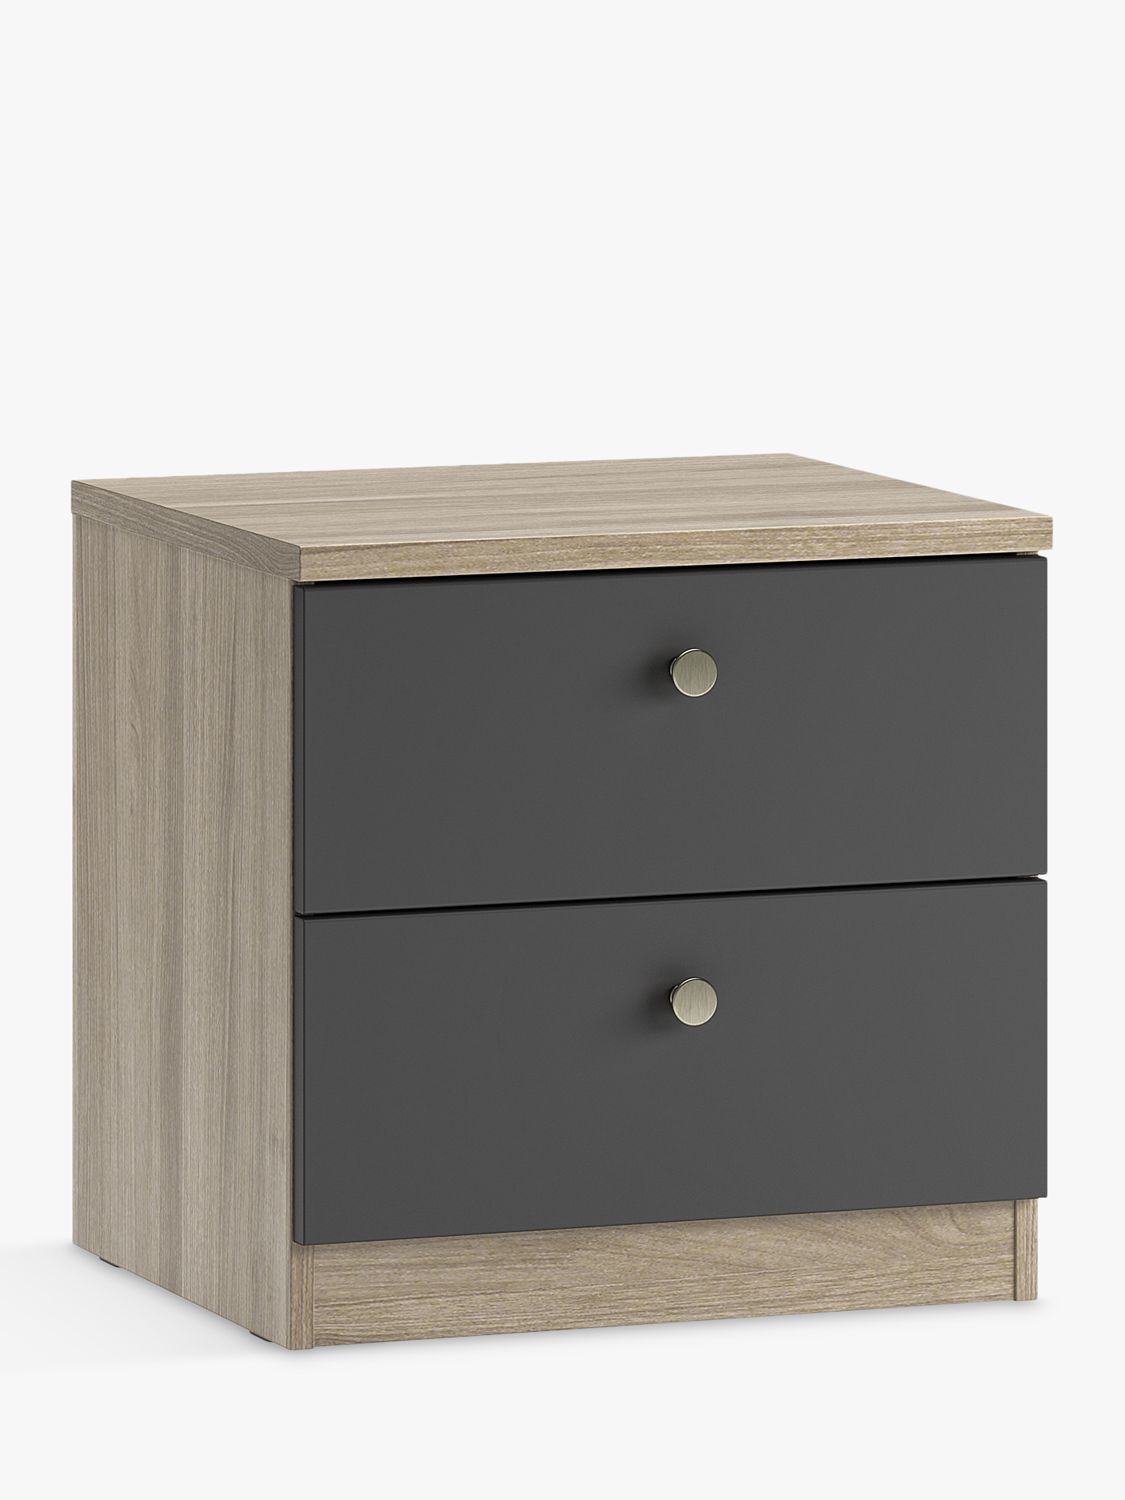 Photo of John lewis anyday mix it bedside table